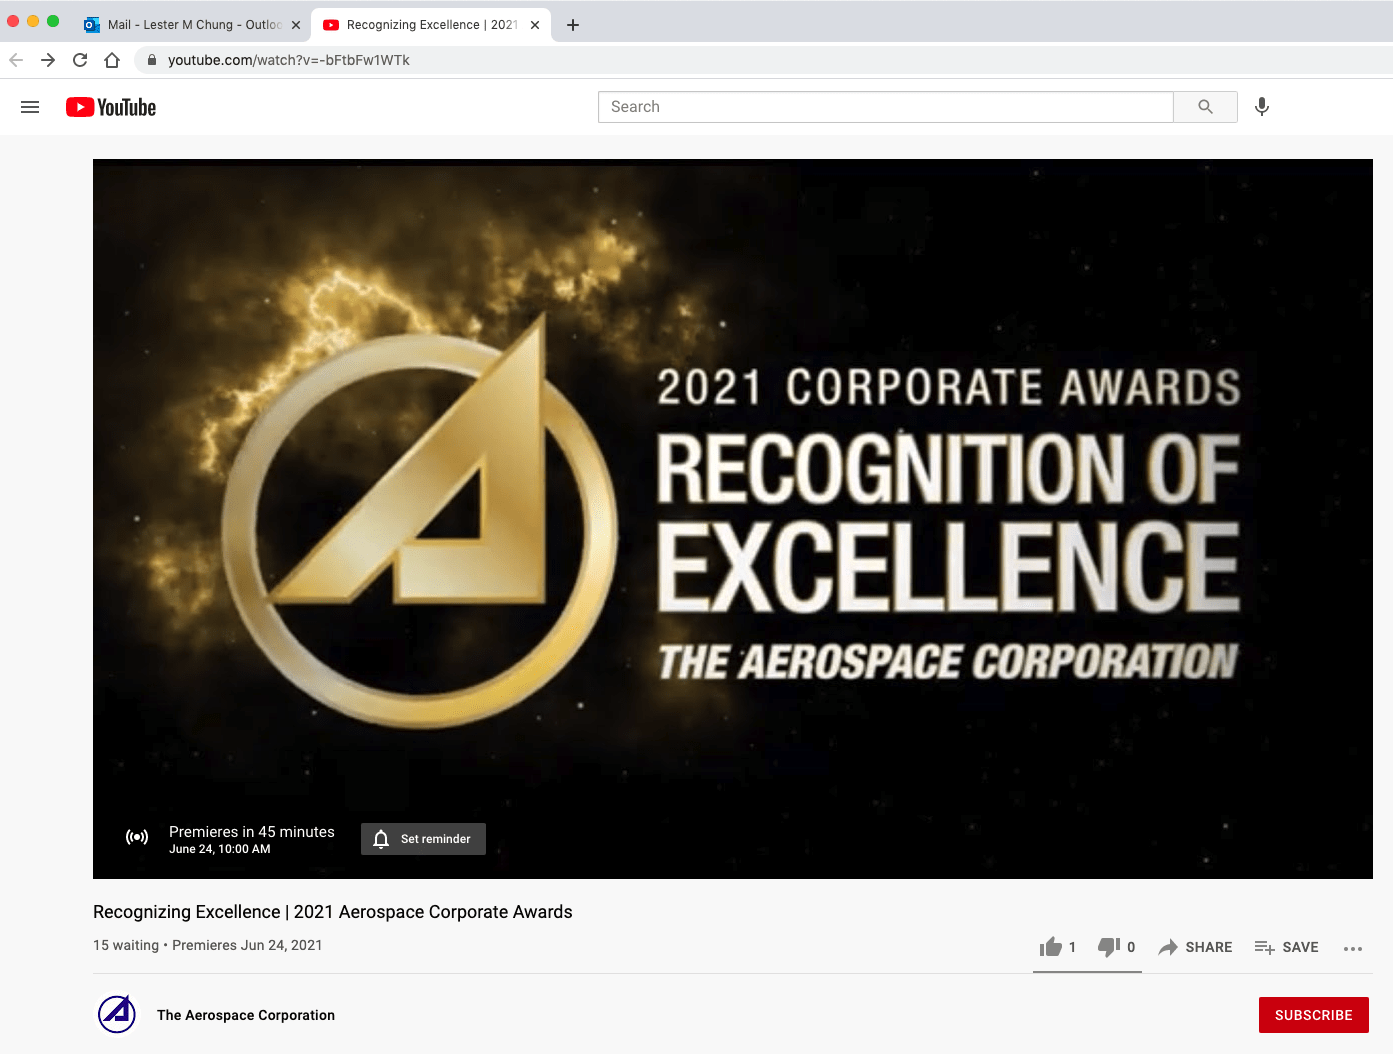 Recognizing Excellence: 2021 Aerospace Corporate Awards